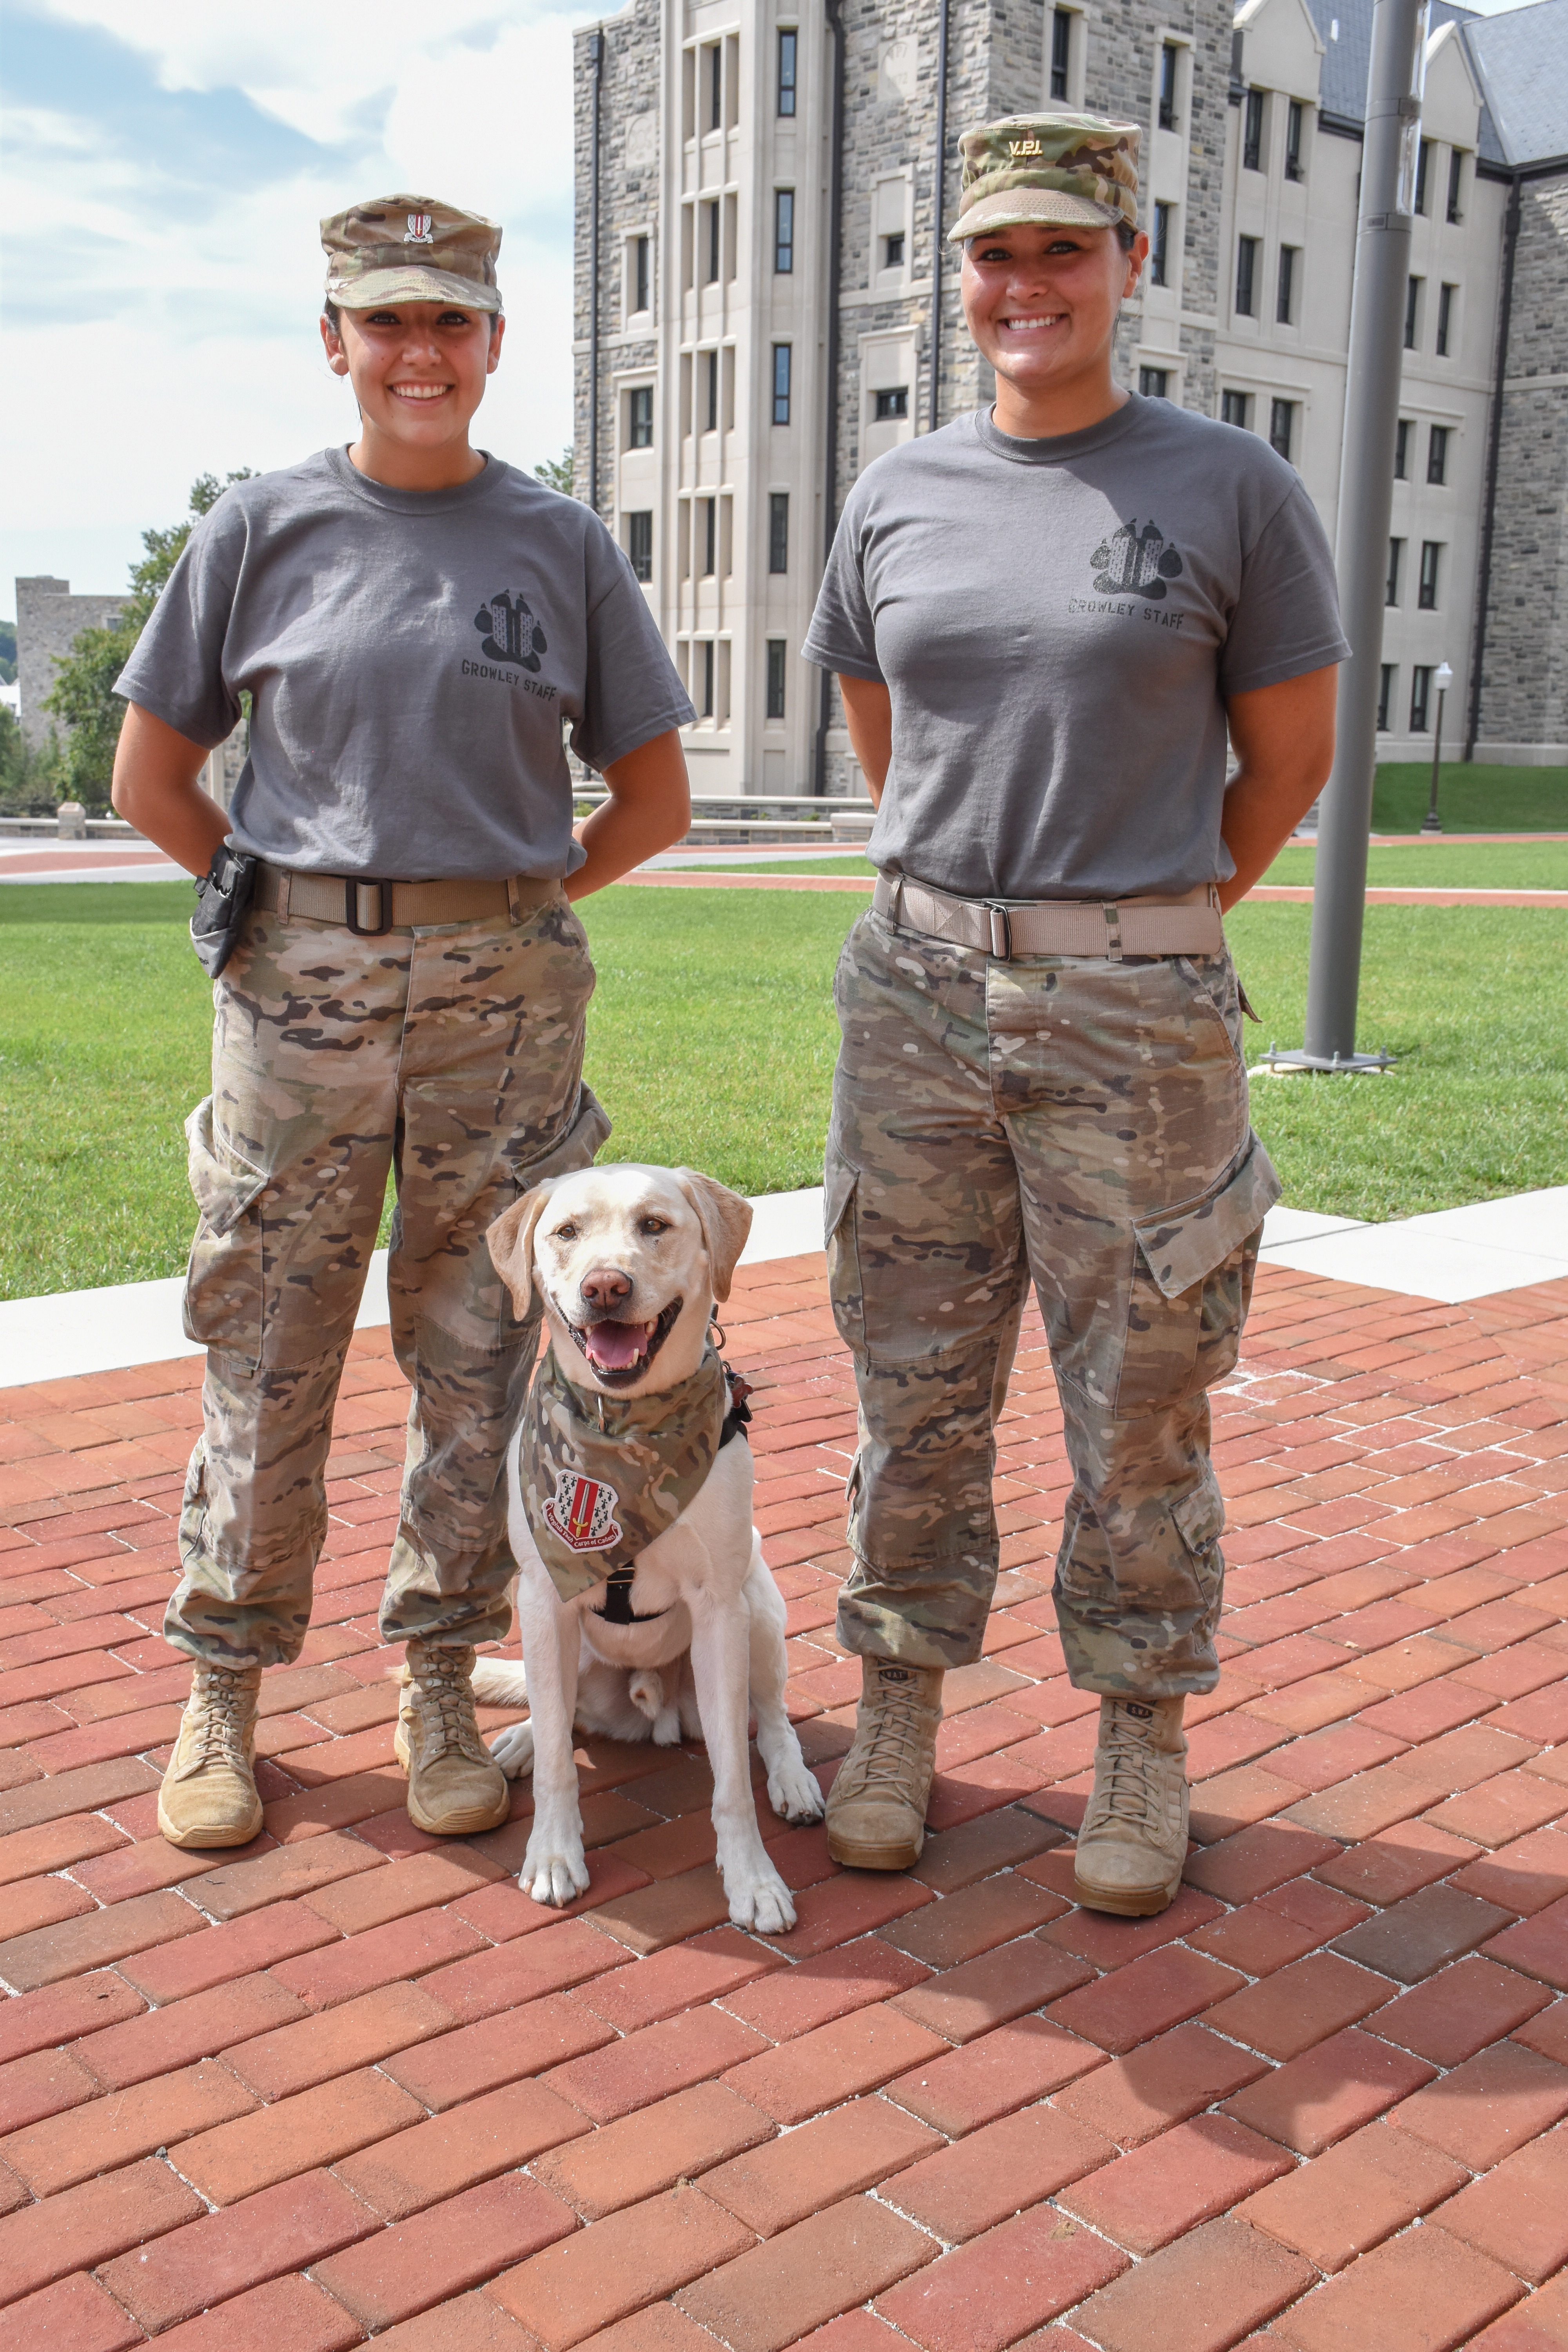 Eleanor Franc stands with Growley and another cadet member of Growley Team